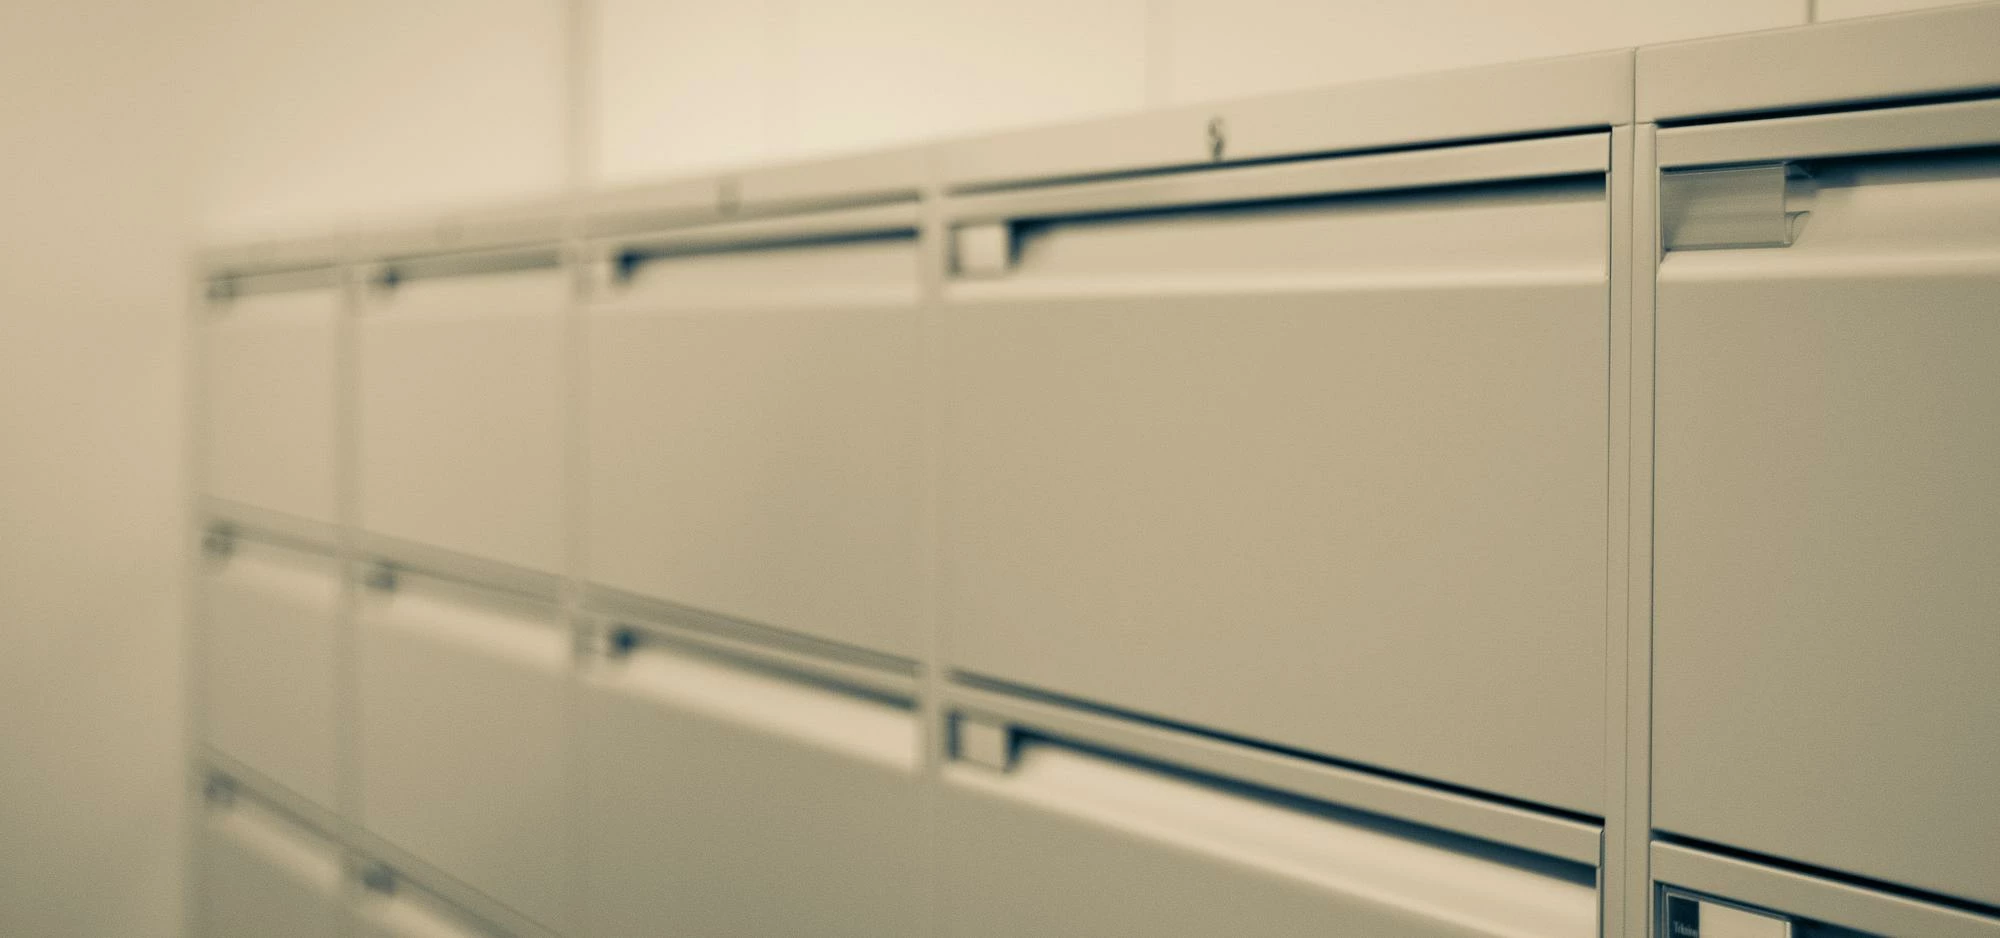 Filing cabinets are costing SMEs as much as £14k per year